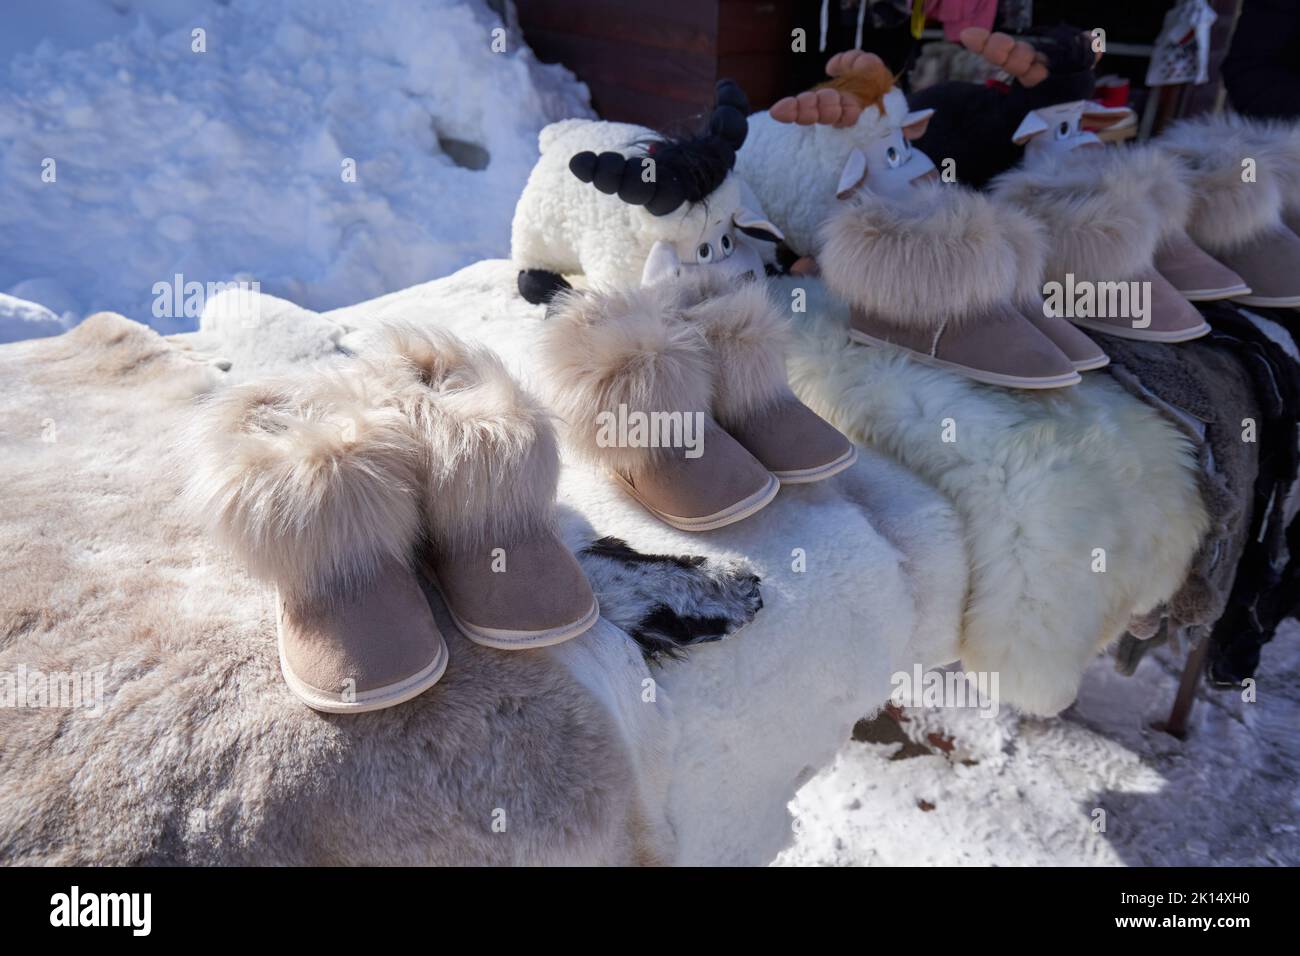 Warm slippers with fur are sold at the street market. Stock Photo